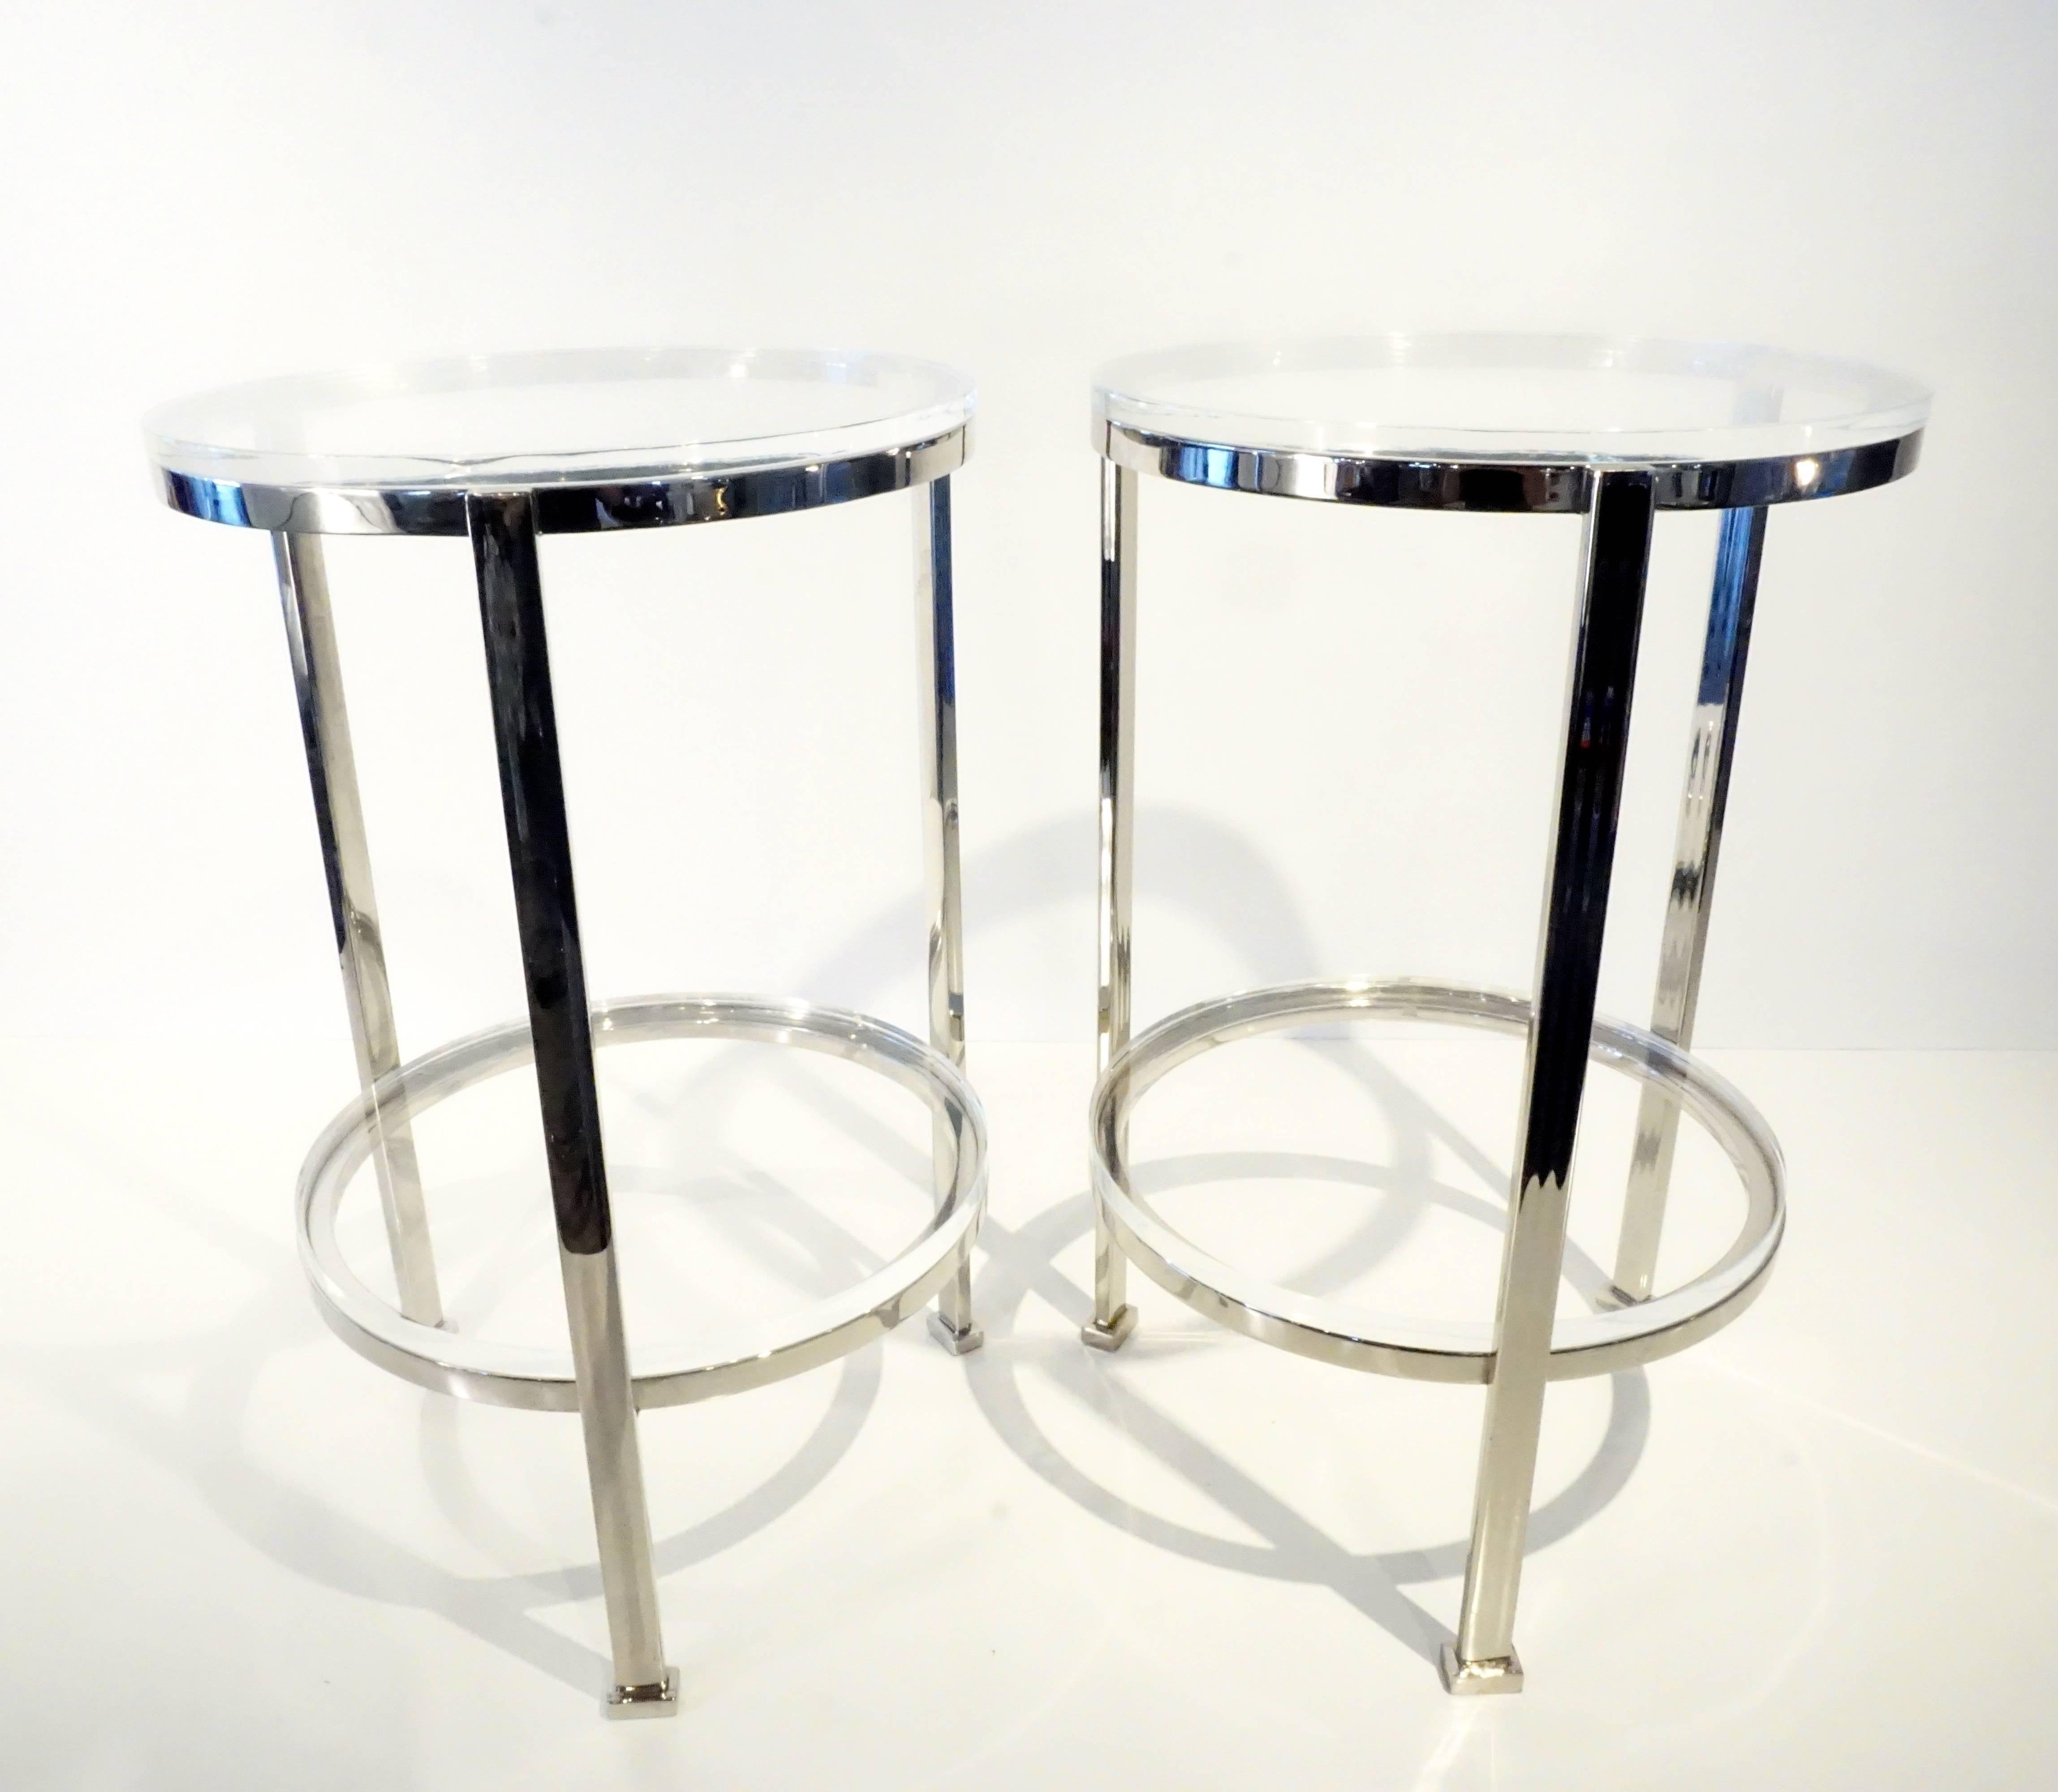 A pair of custom-made two-tier circular side tables made by Charles Hollis Jones C. 1990. The frames are fabricated from solid nickel-plated steel and the shelves are Lucite, with the top shelf having a rabbeted edge. The tables were acquired from